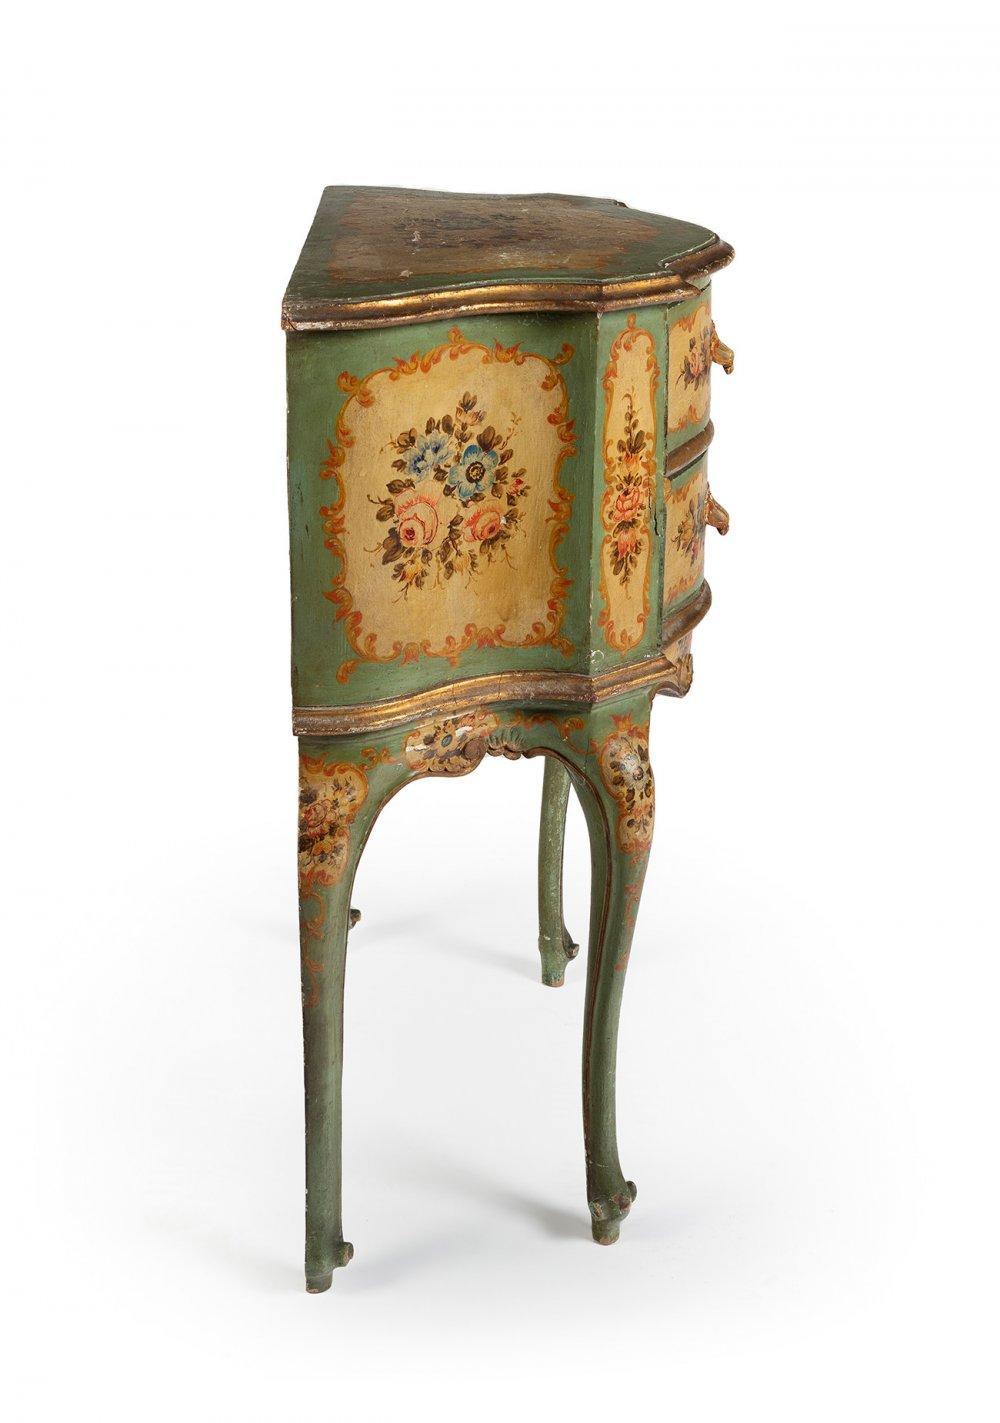 Rococo Revival Intricate and Beautiful Antique Hand-Painted Small Commode in Rococo Manner